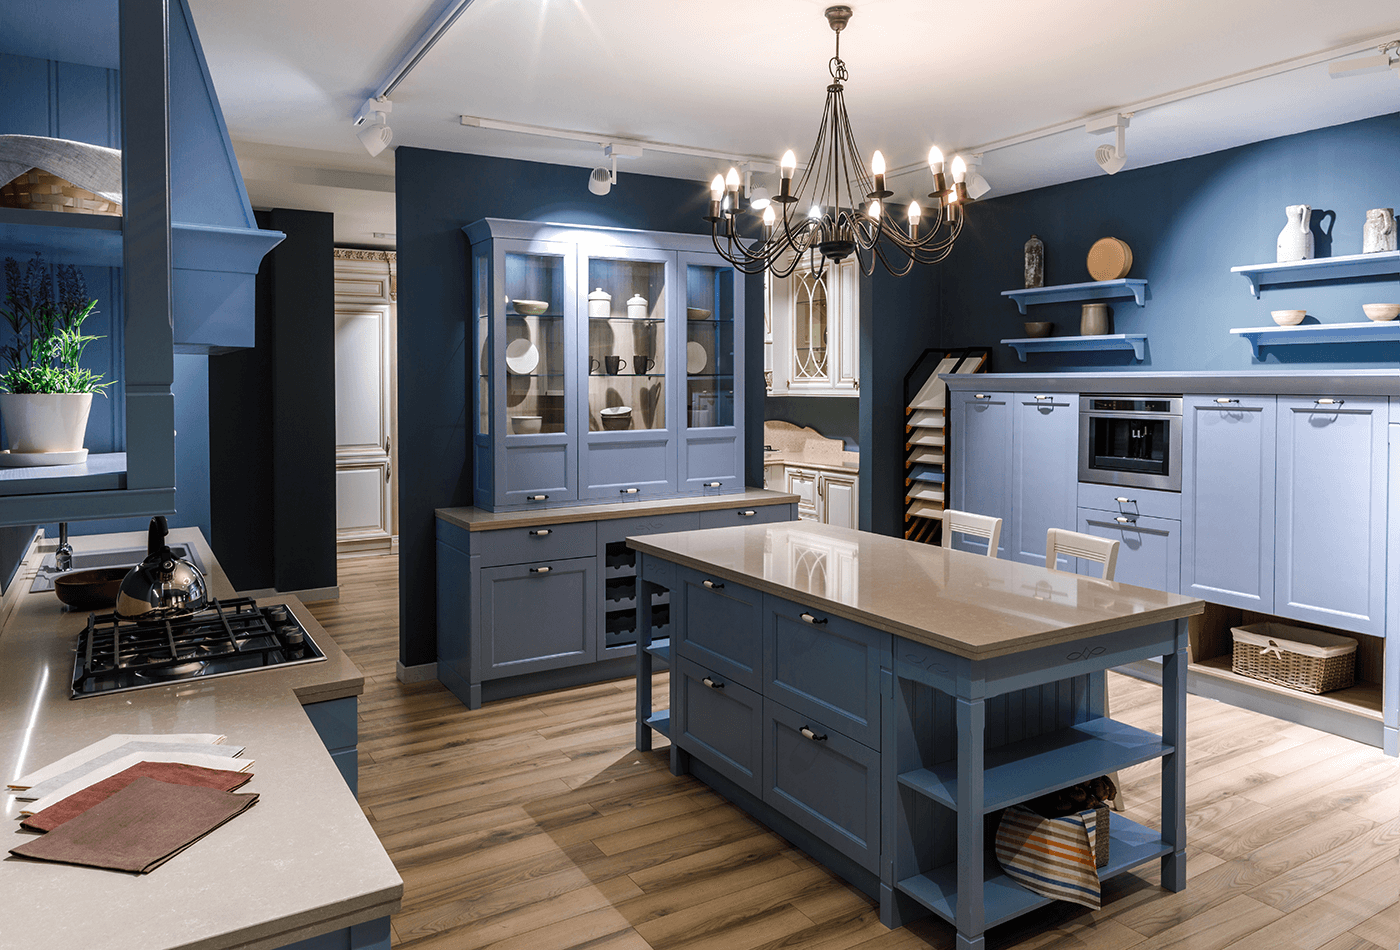 https://dropinblog.net/34246798/files/featured/Are_Blue_kitchens_a_Good_Idea.png